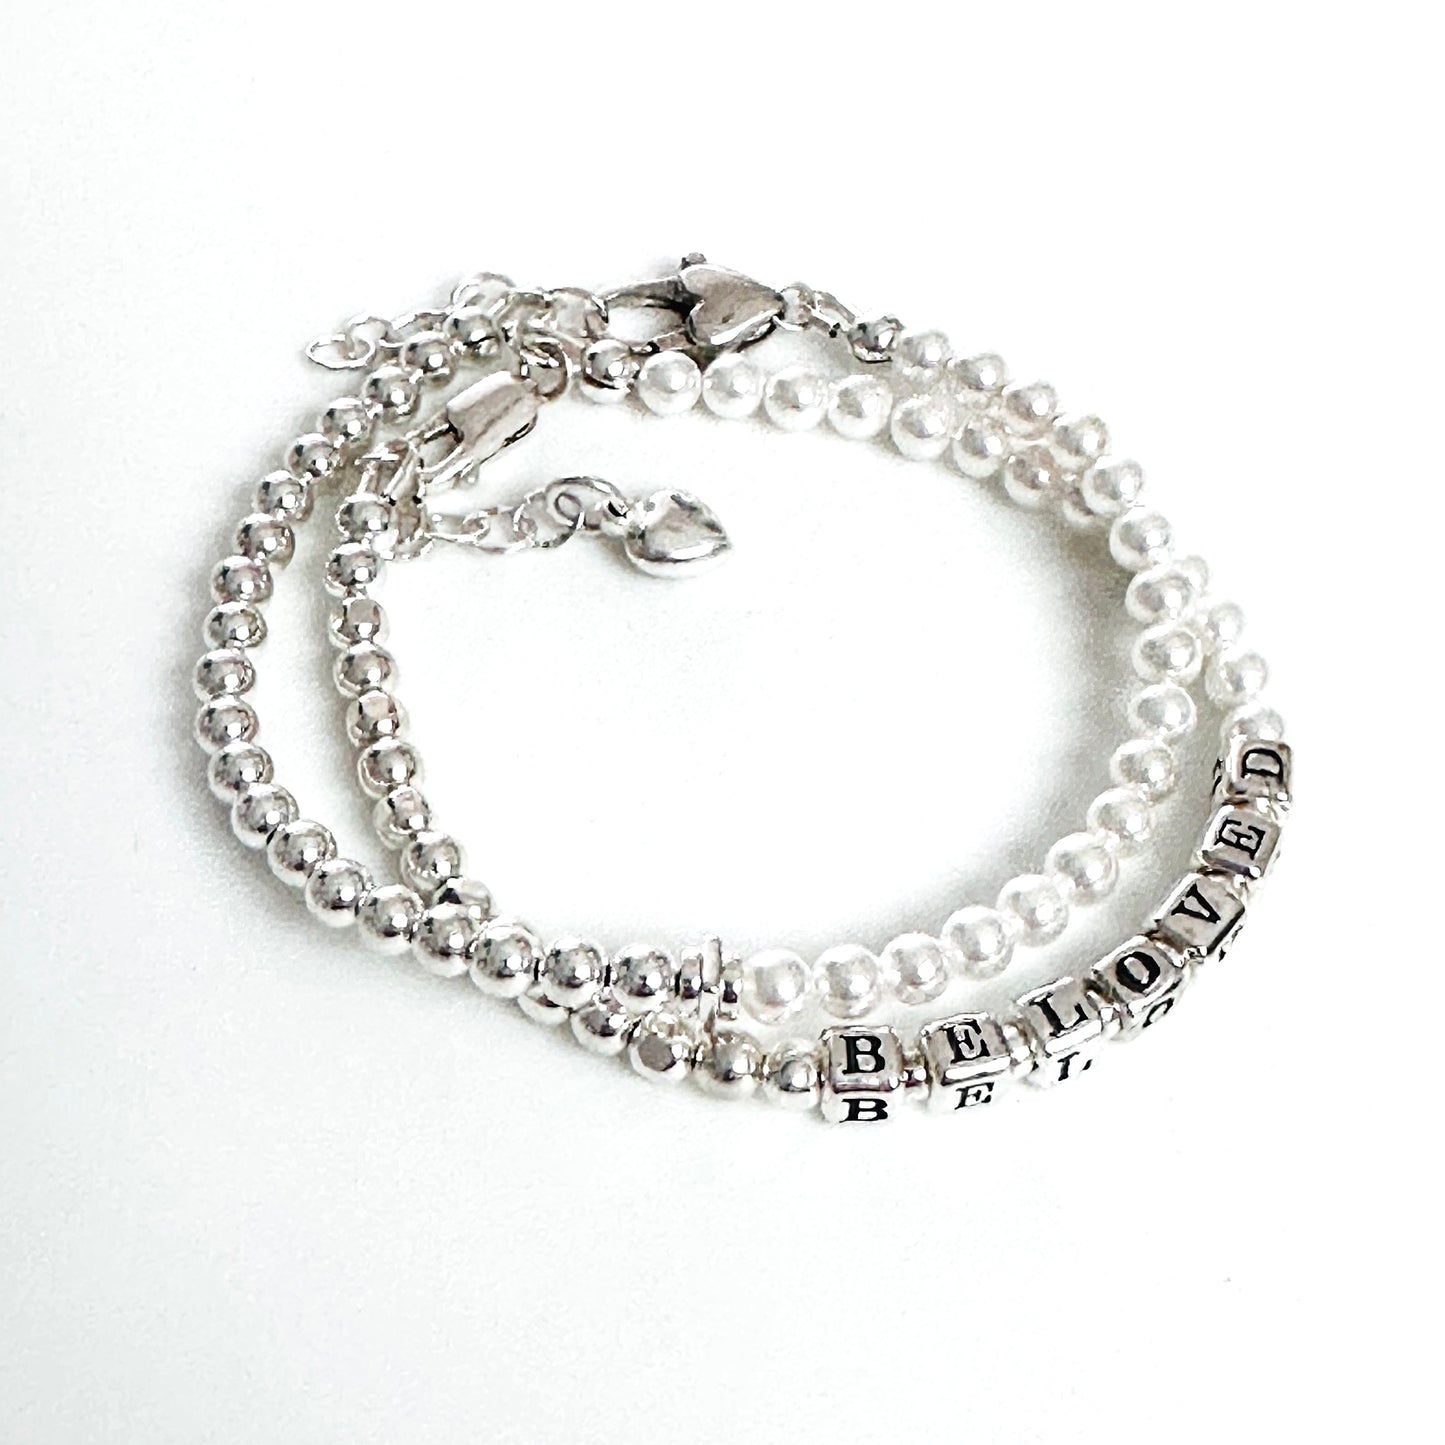 Beloved Mother's Day Bracelet in sterling silver and pearls and heart charm